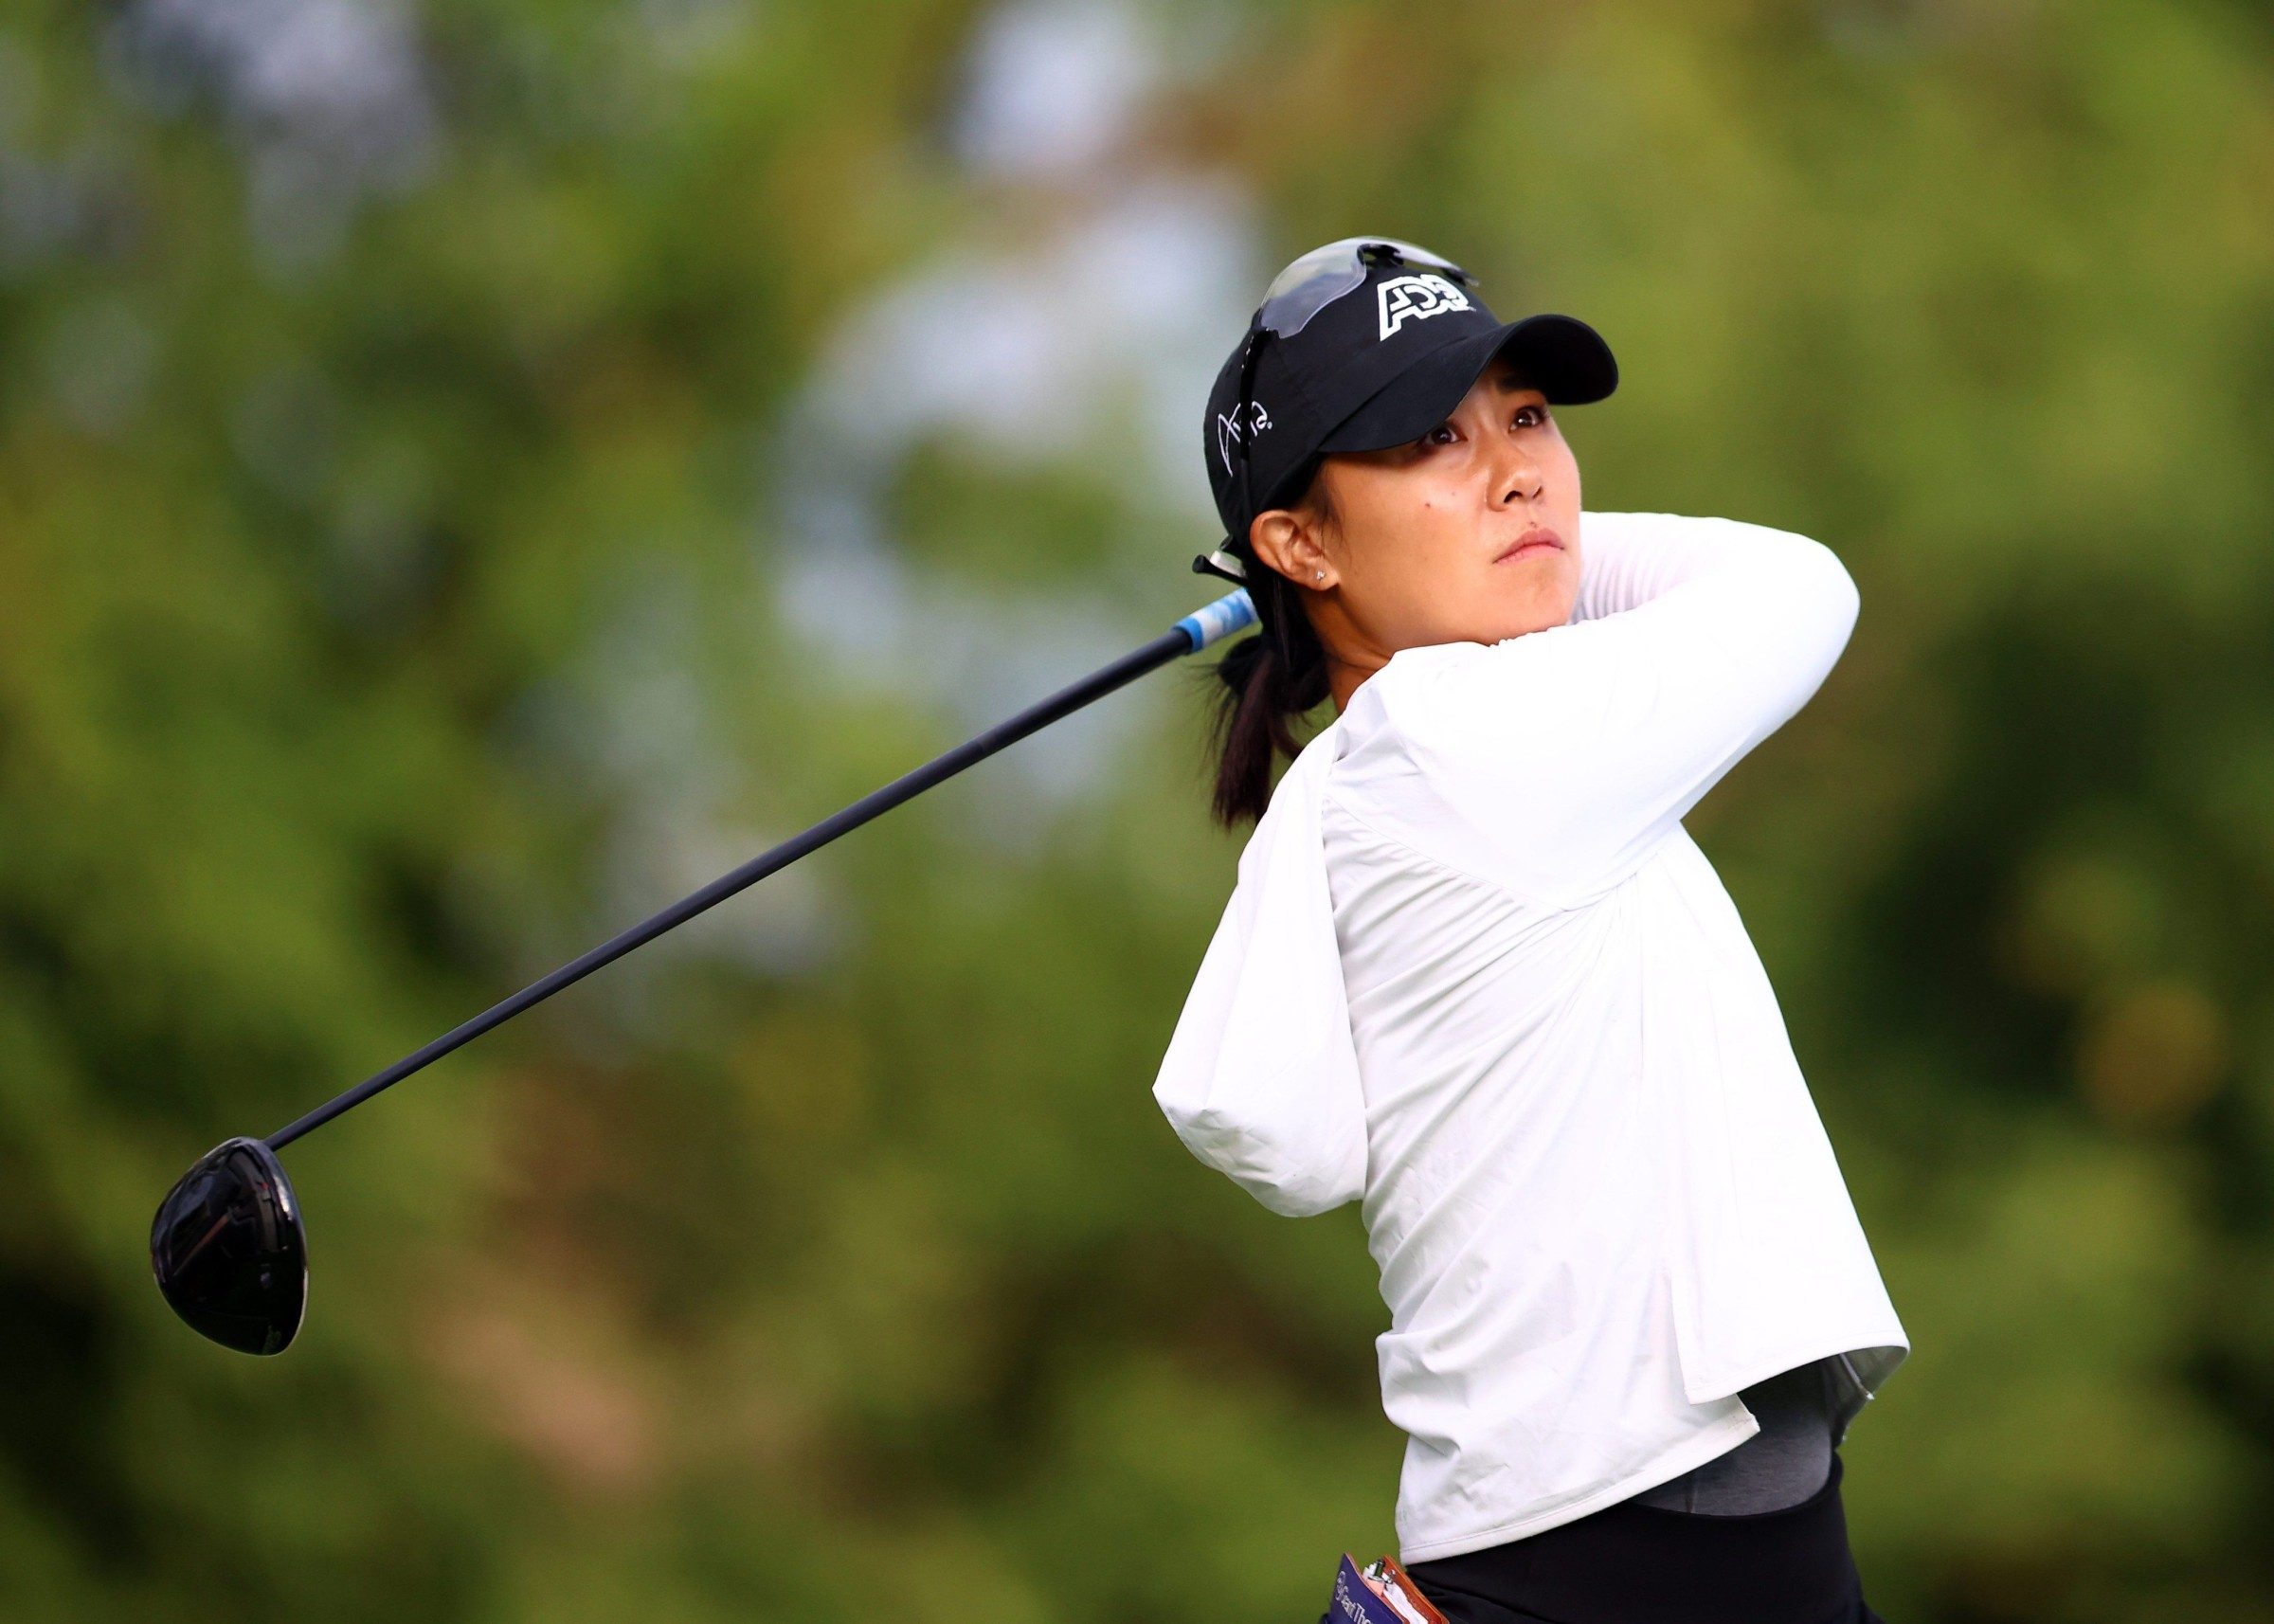 An Interview with Danielle Kang